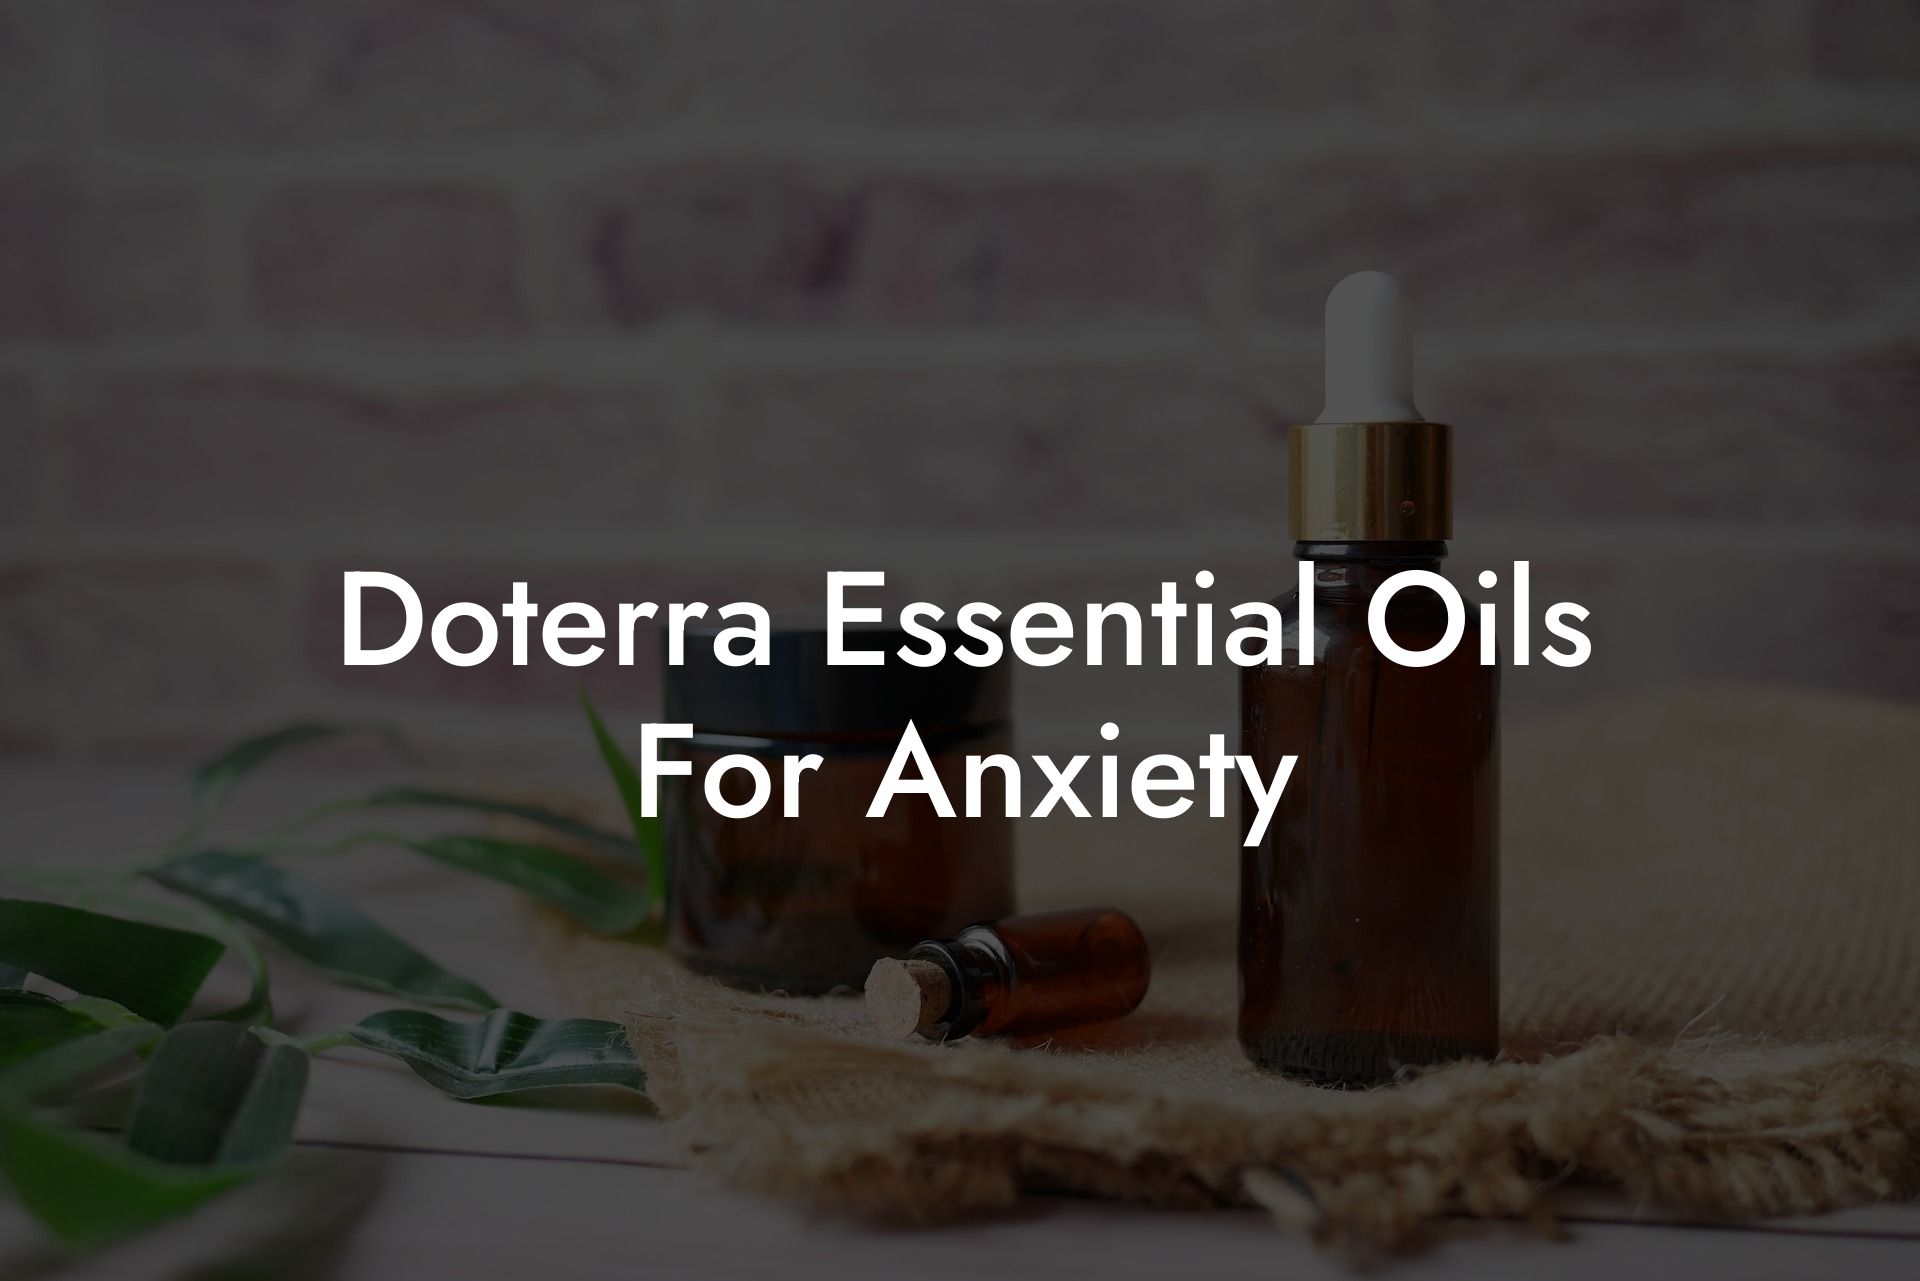 Doterra Essential Oils For Anxiety